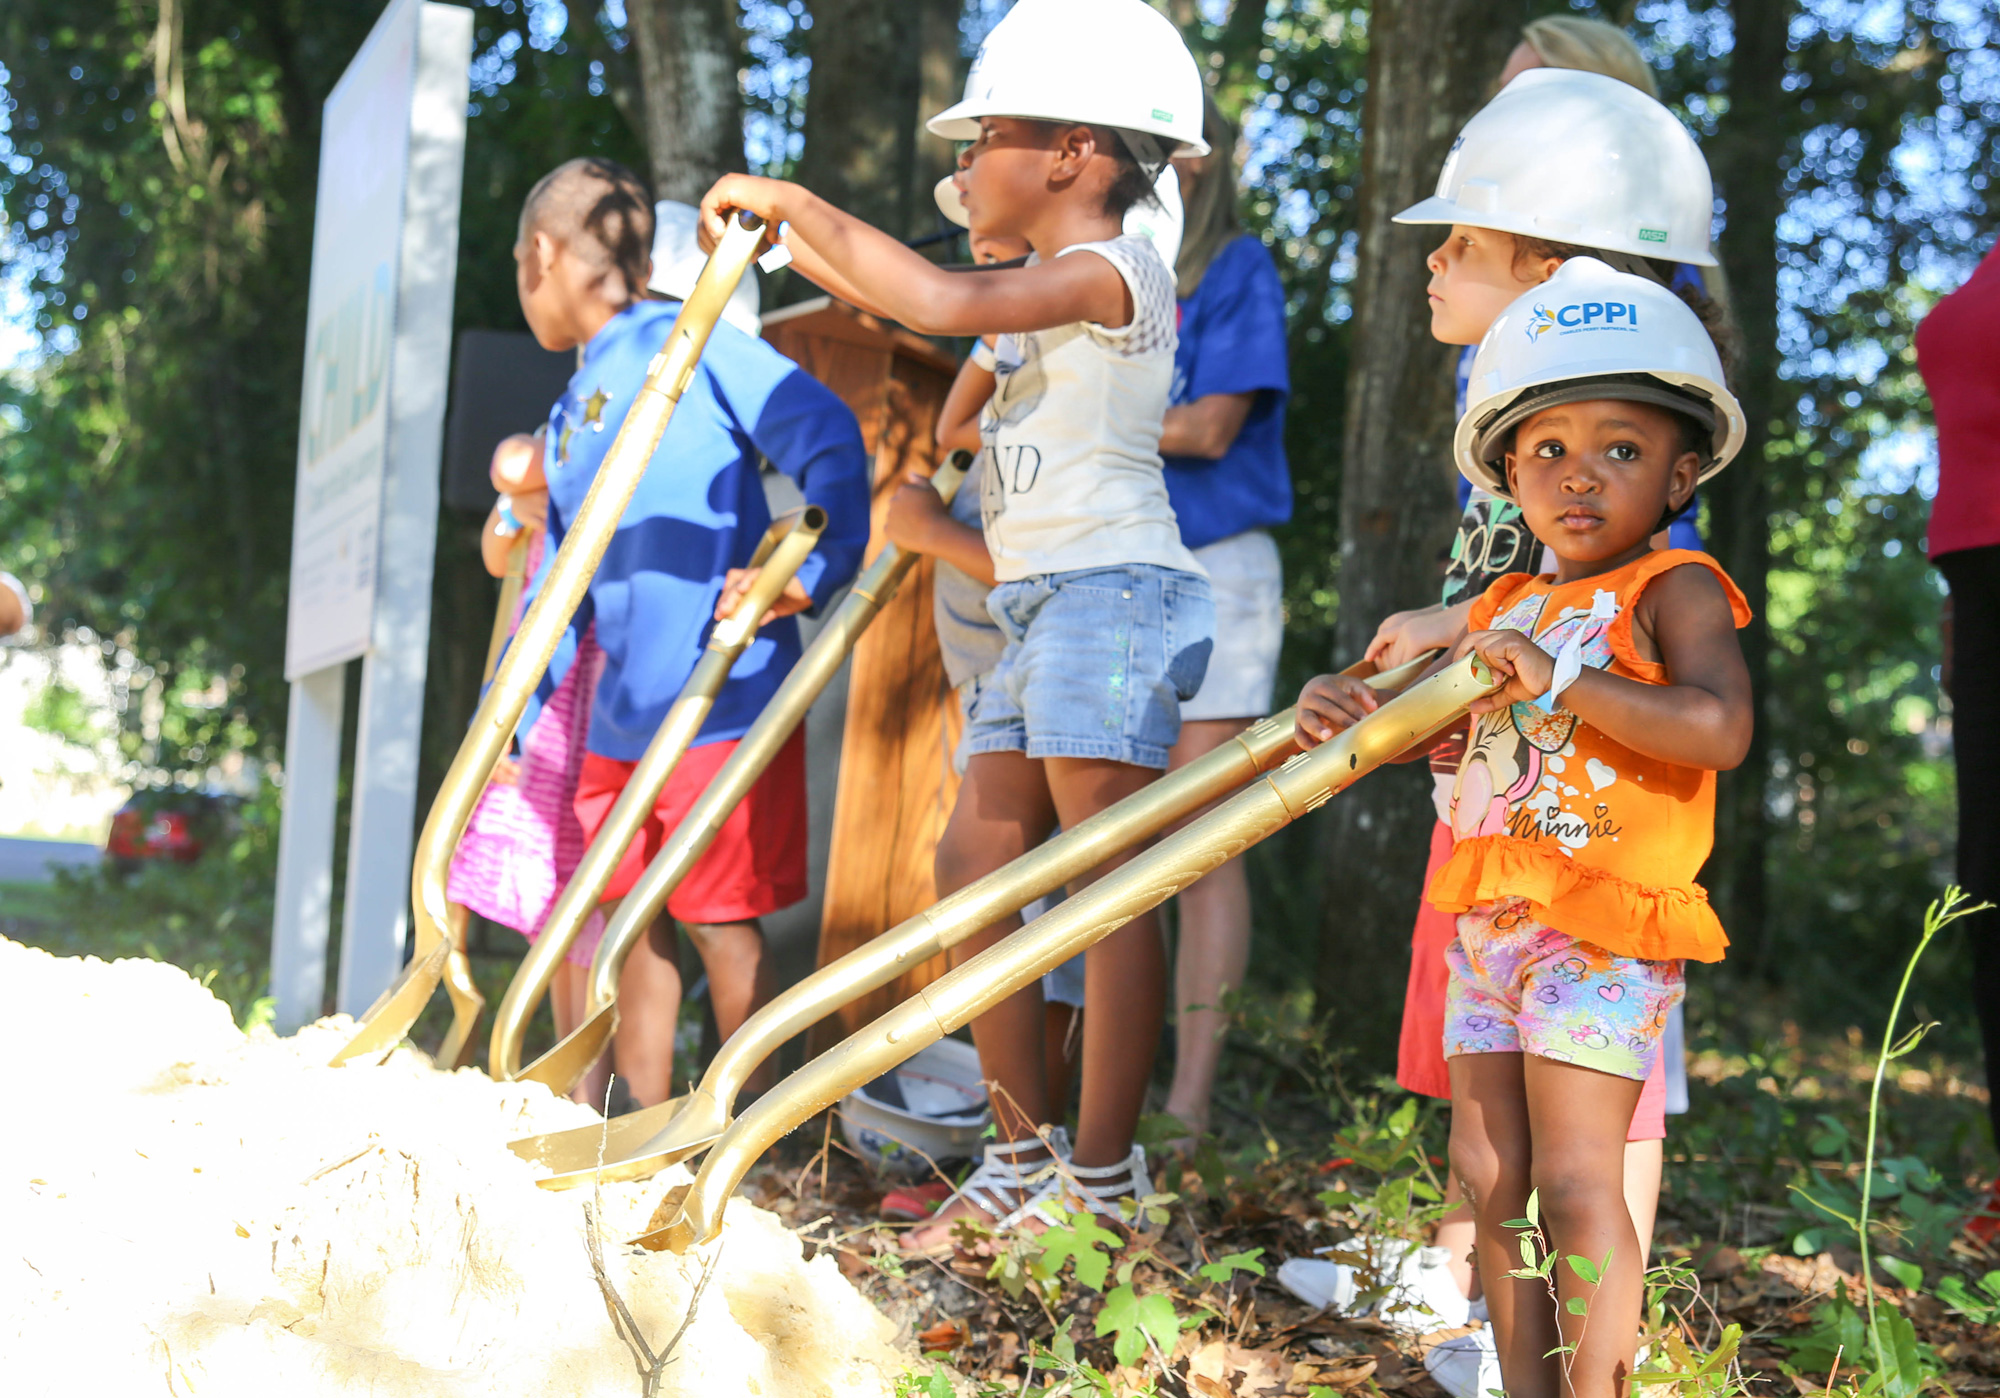 A little girl holding a shovel at a groundbreaking event.